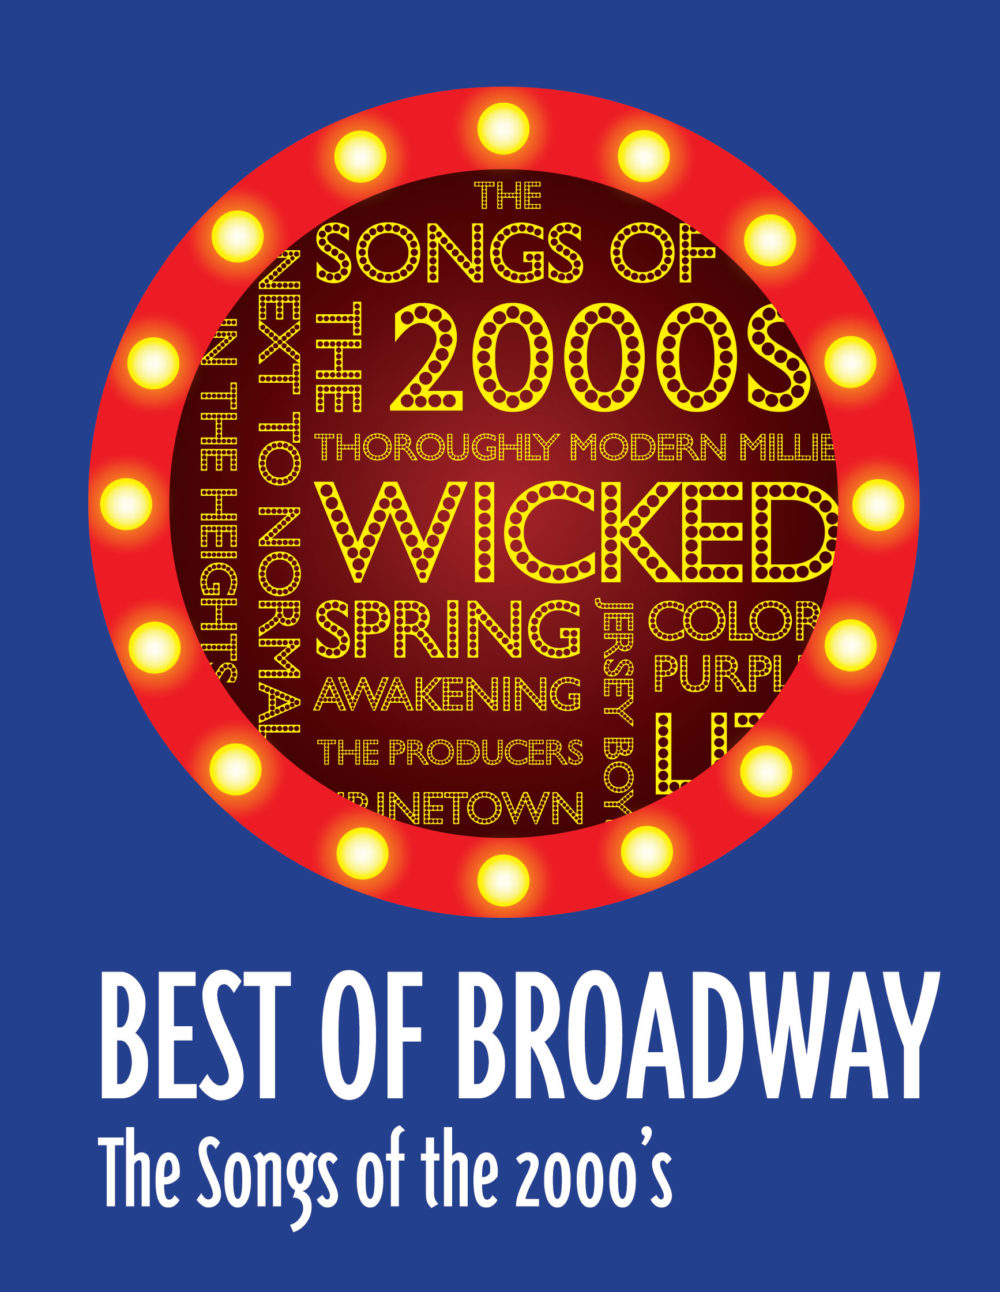 Best of Broadway: The Songs of the 2000s